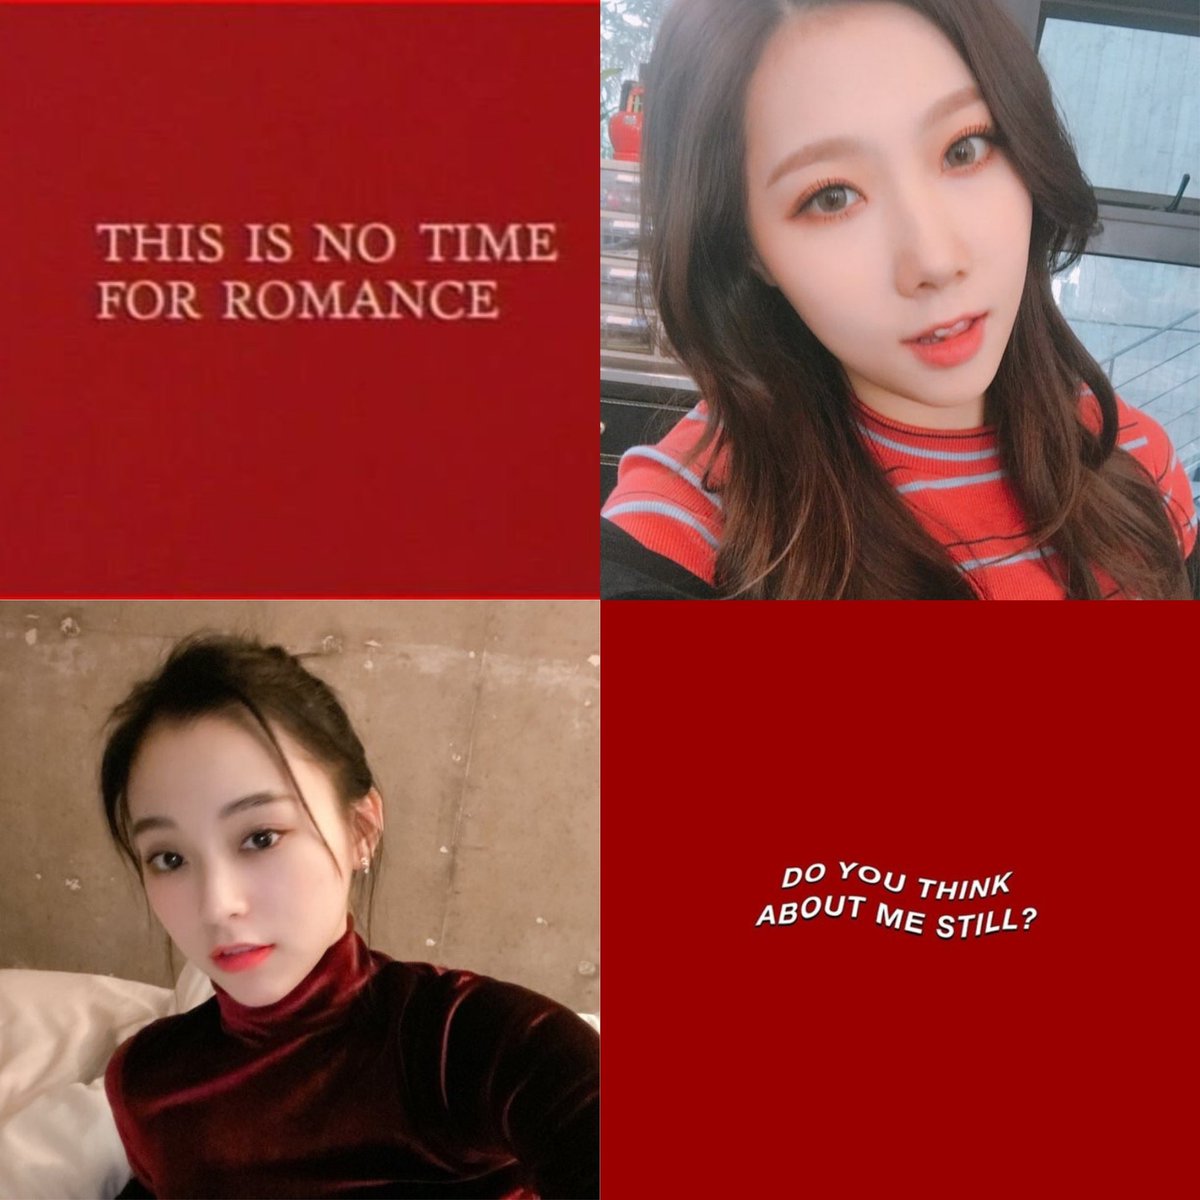 "why are you on the other side of the fog cowardly pretending not to know me?"after a year long relationship, handong breaks up with gahyeon without an explanation. it's up to gahyeon to piece together what went wrong, realizing that it's much bigger than the two of them.